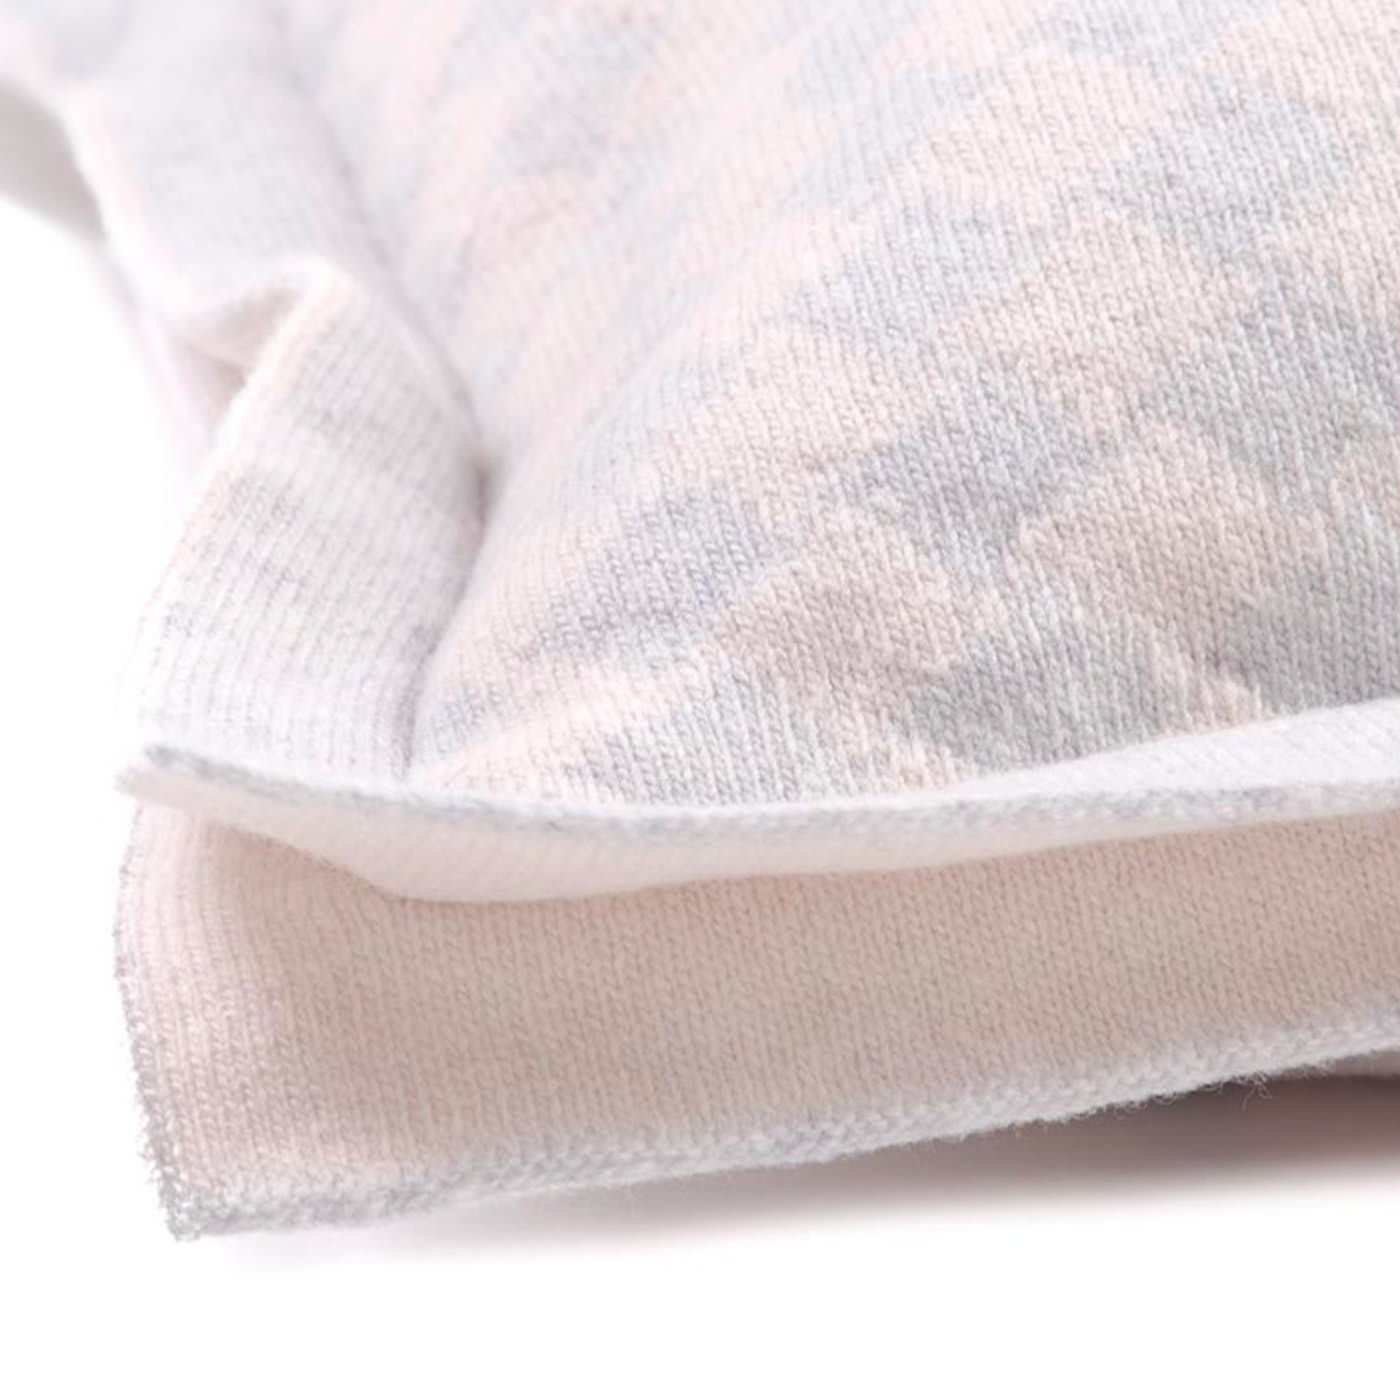 Baby Blanket with Small Pied de Poule Pattern - Roberta Licini